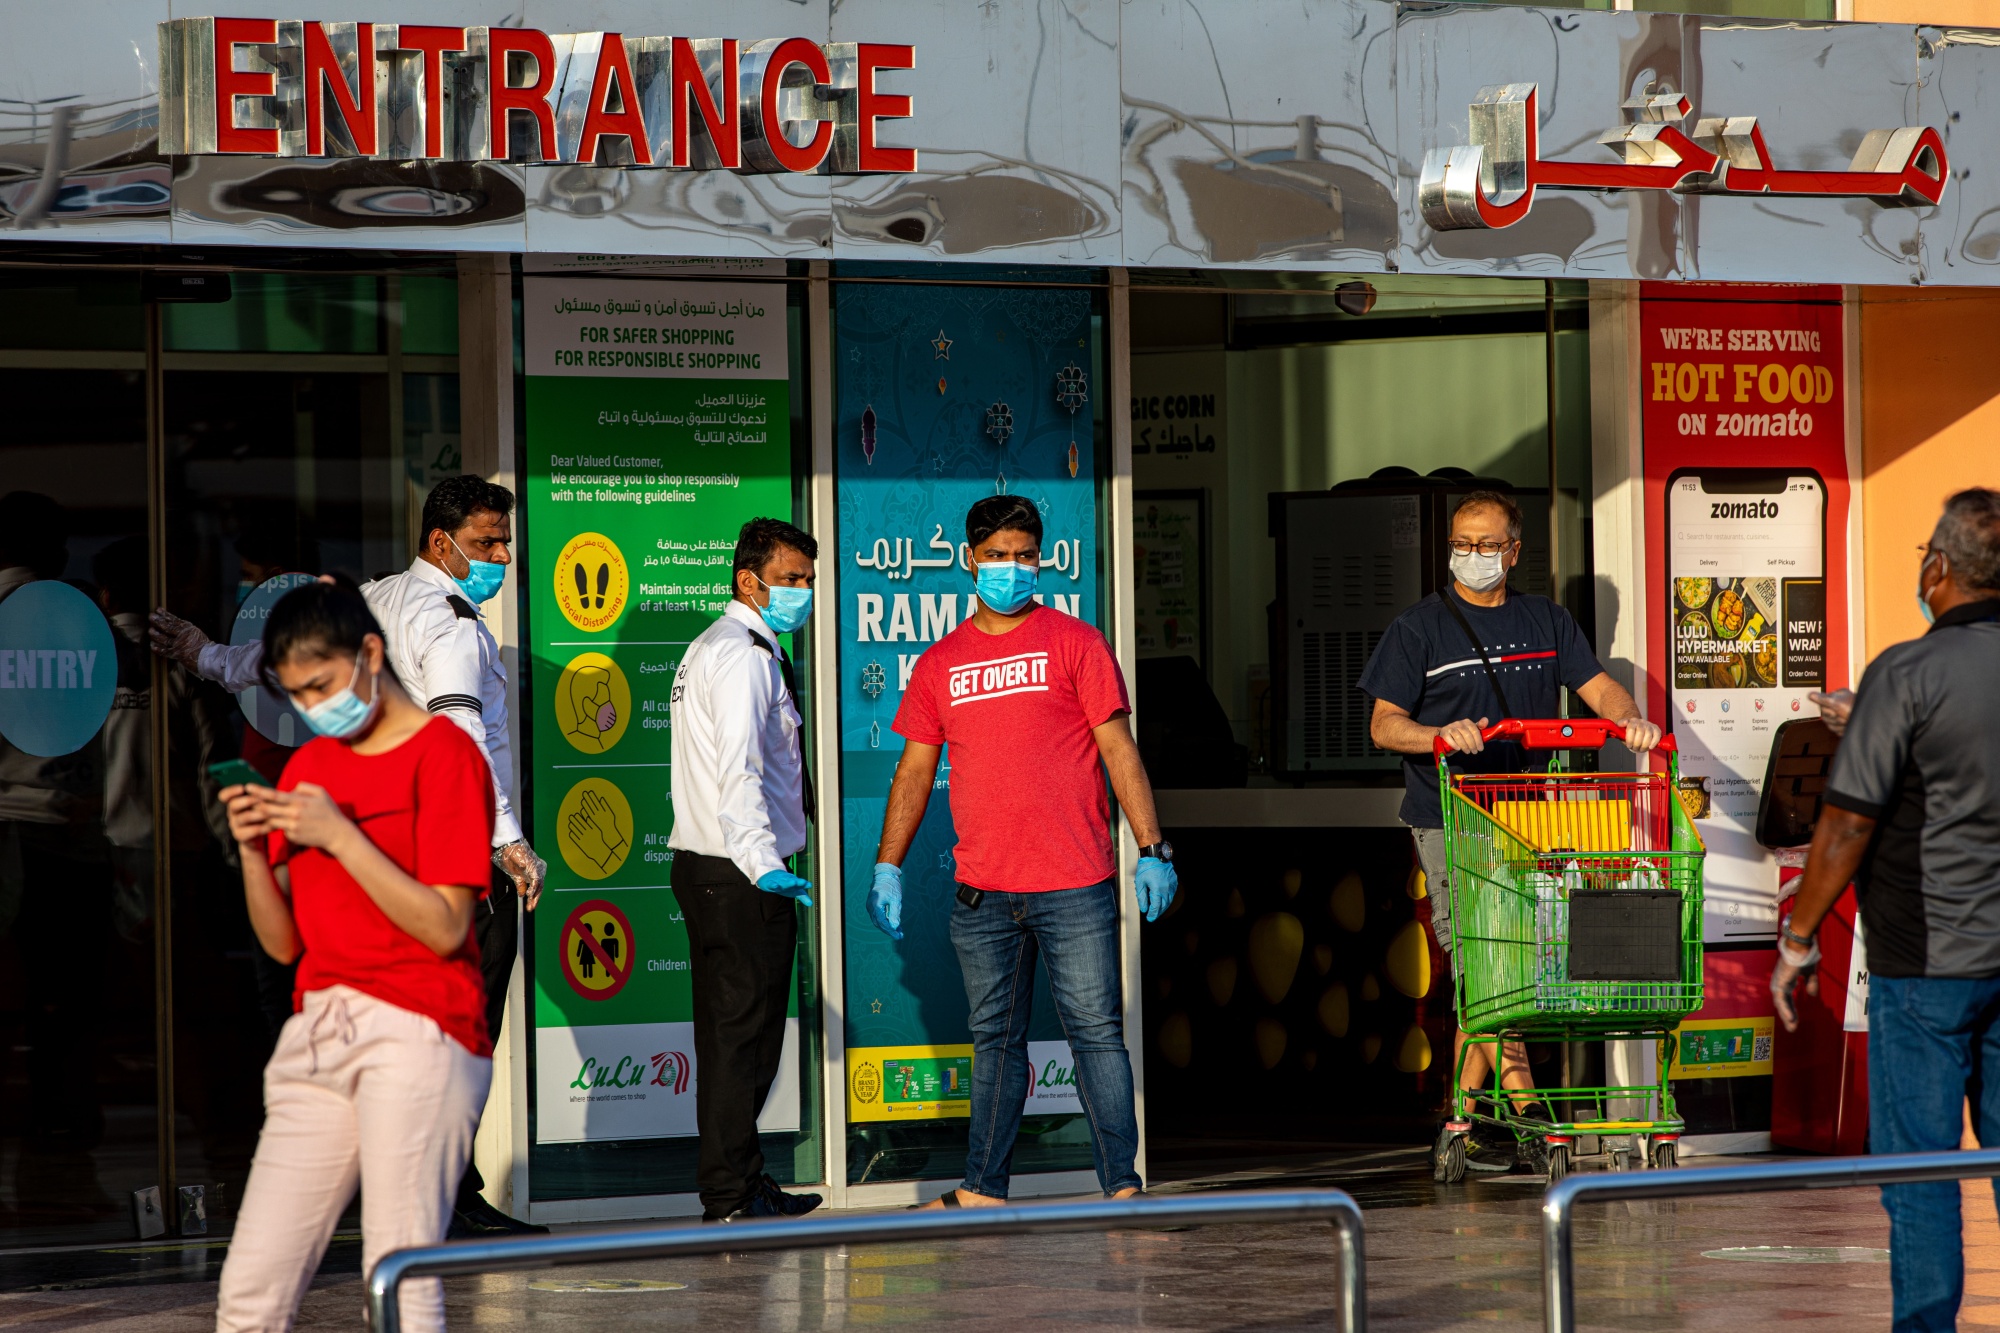 Security guards guide shoppers at the entrance of a market in Dubai, on April 23.